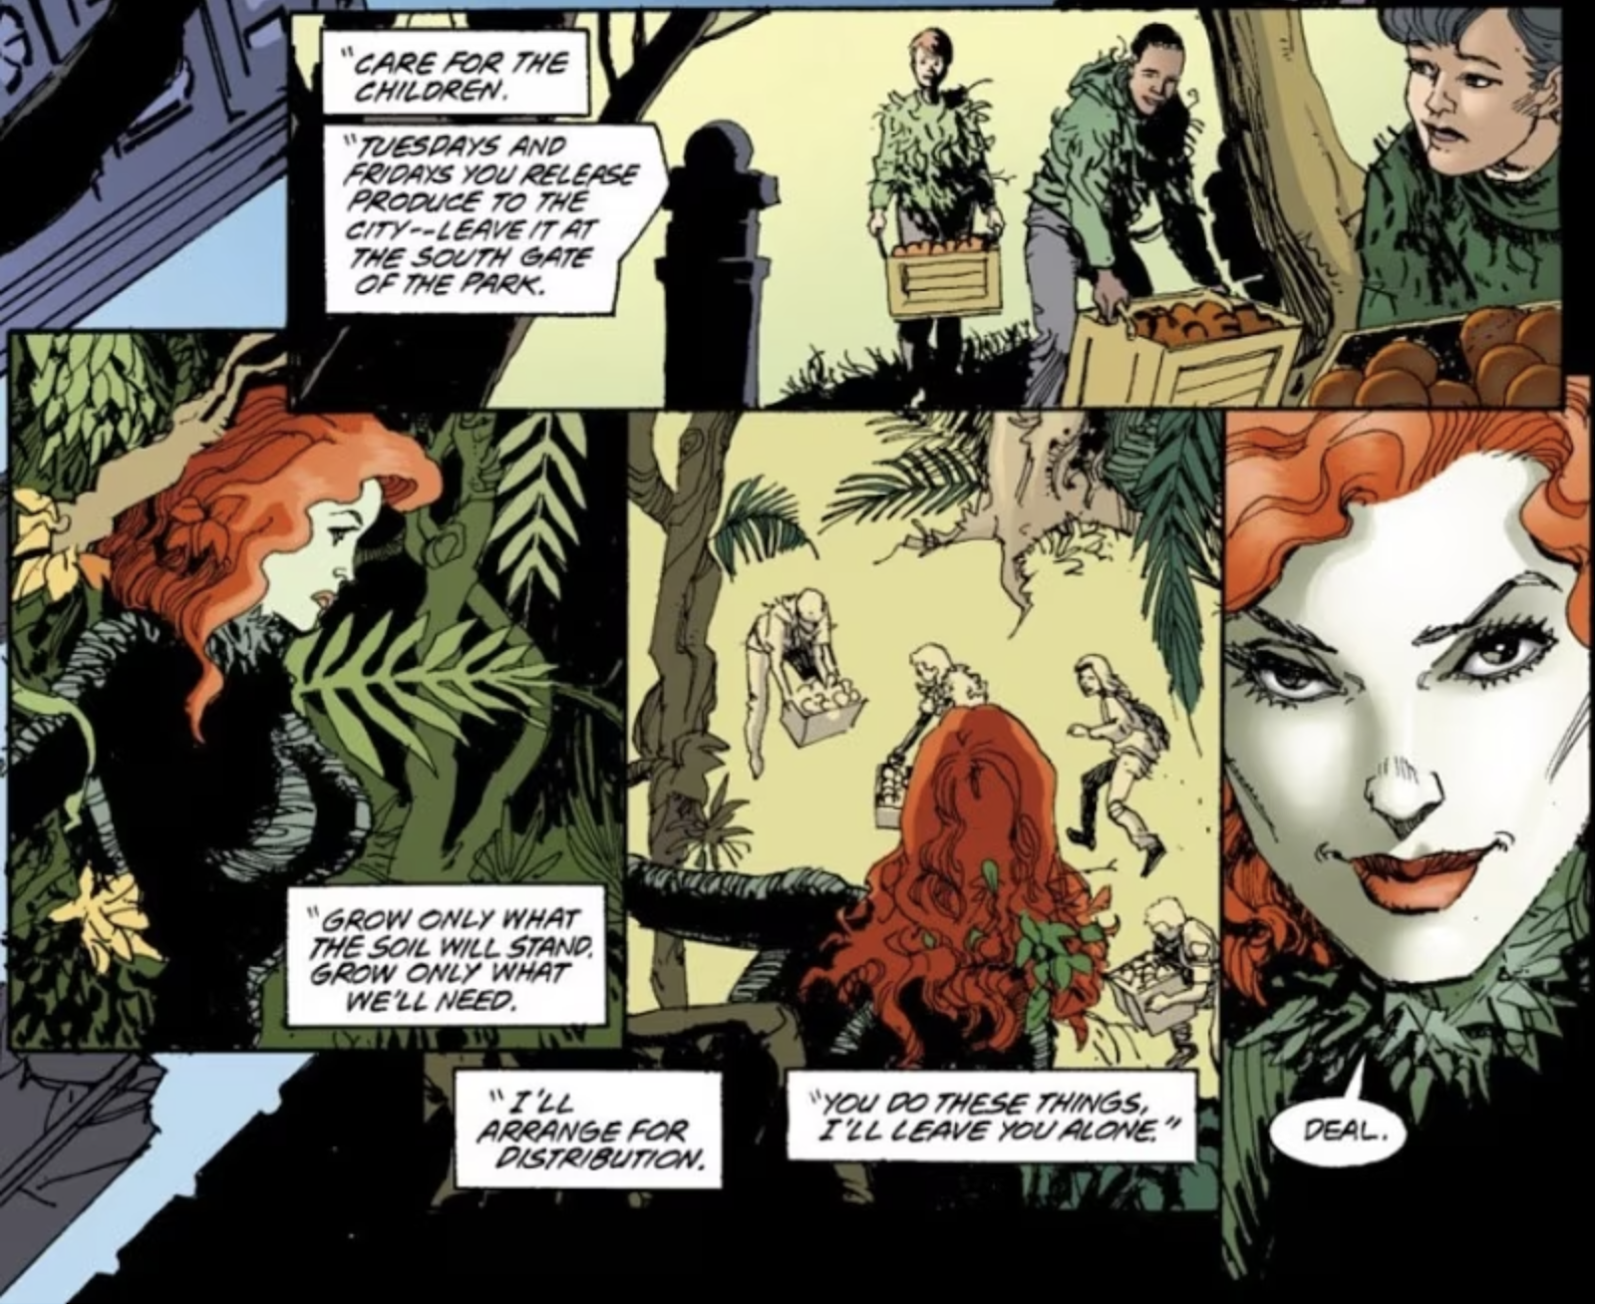 A page from “villain” Poison Ivy, “grow only what the soil will stand, grow only what we’ll need.”